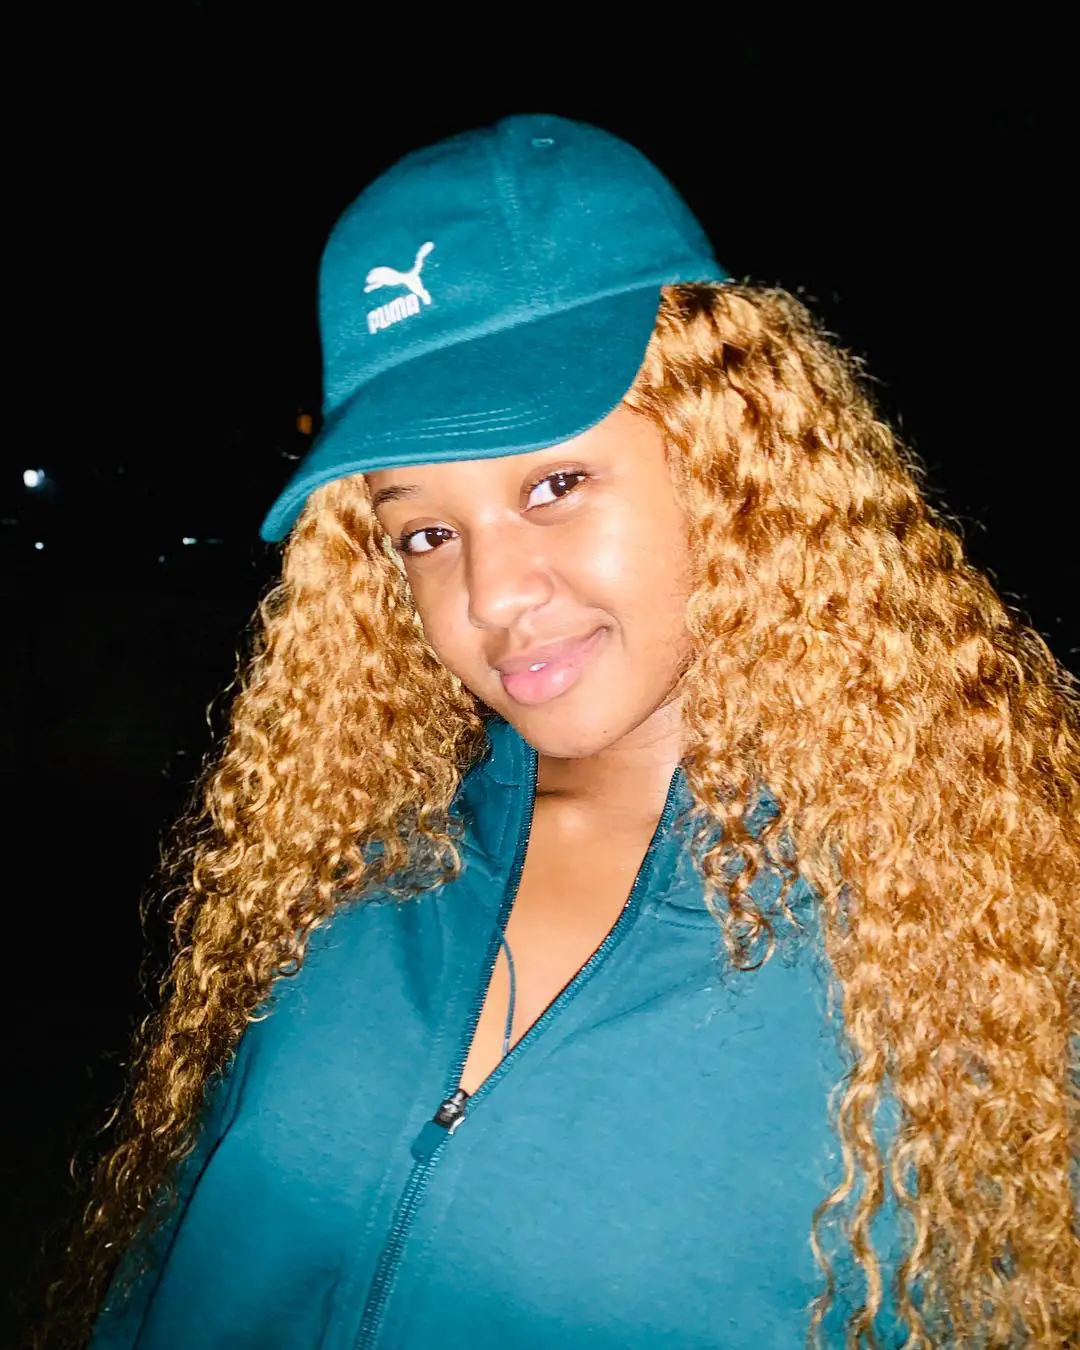 Babes Wodumo Stays At Her Parents House After Being Discharged From The Hospital